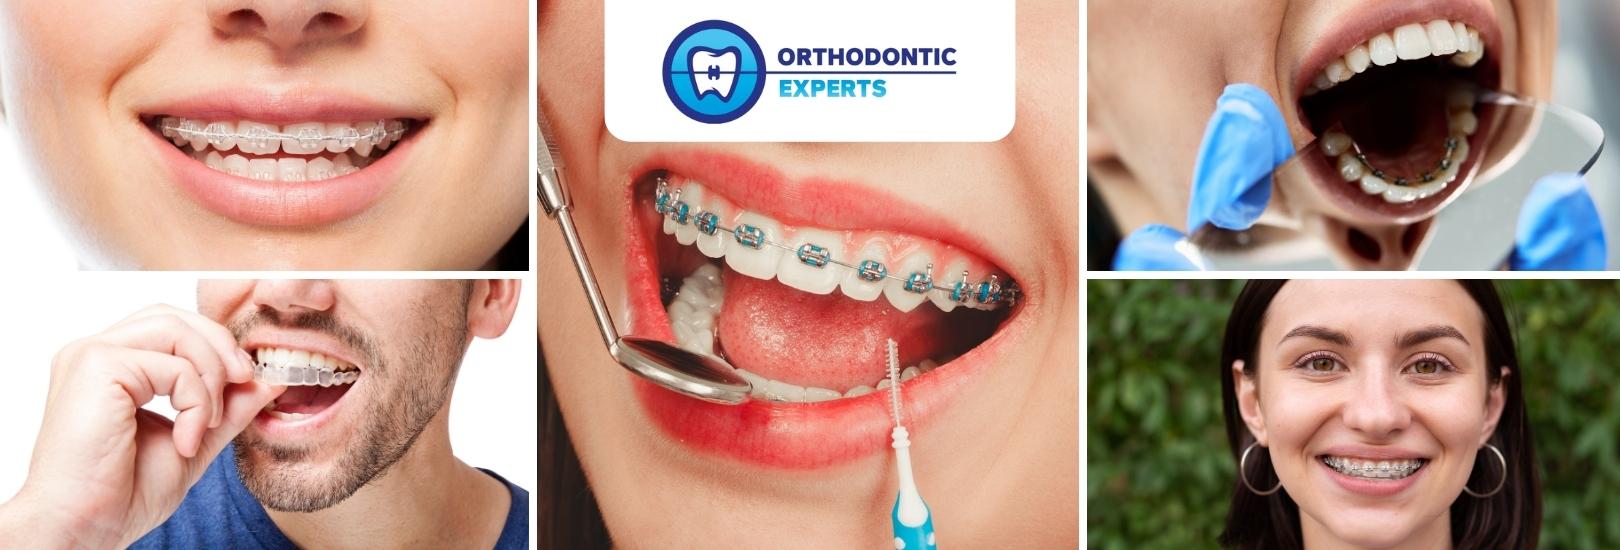 https://www.orthodonticexprts.com/wp-content/uploads/2018/10/Different-Types-Of-Braces-What-Are-They.jpg